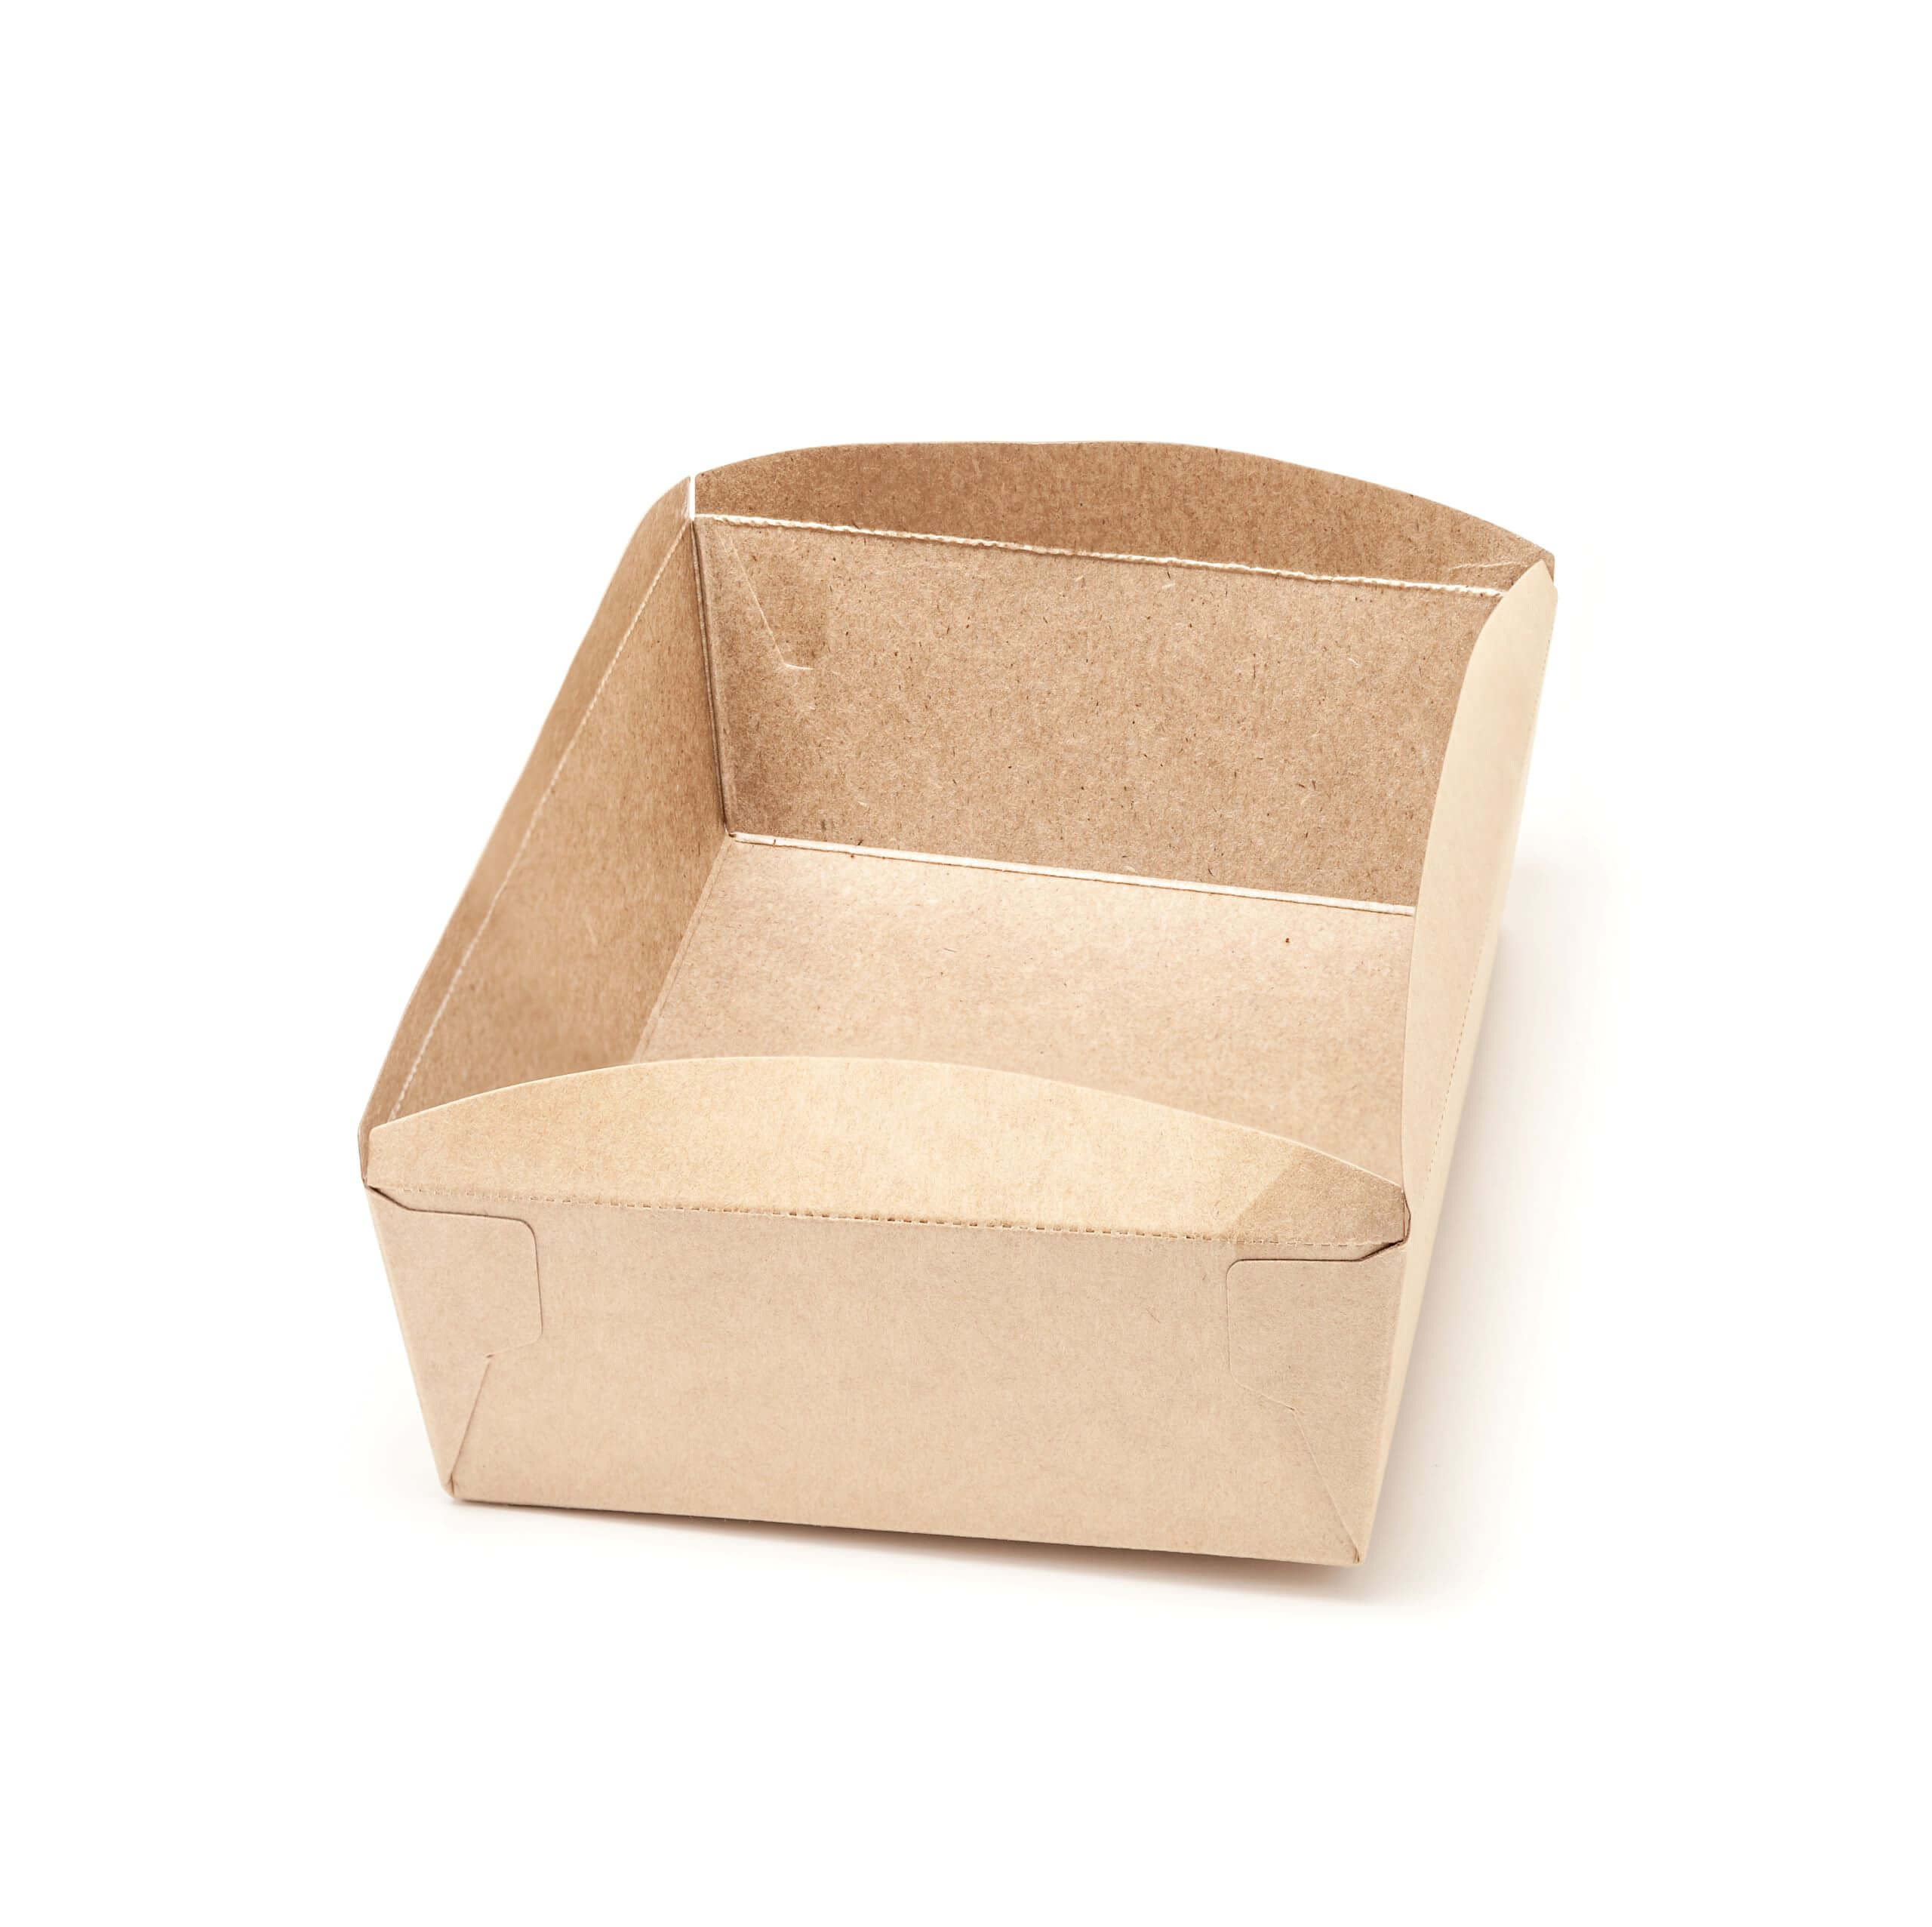 An image of one of our Kraft and Bagasse Food Trays.